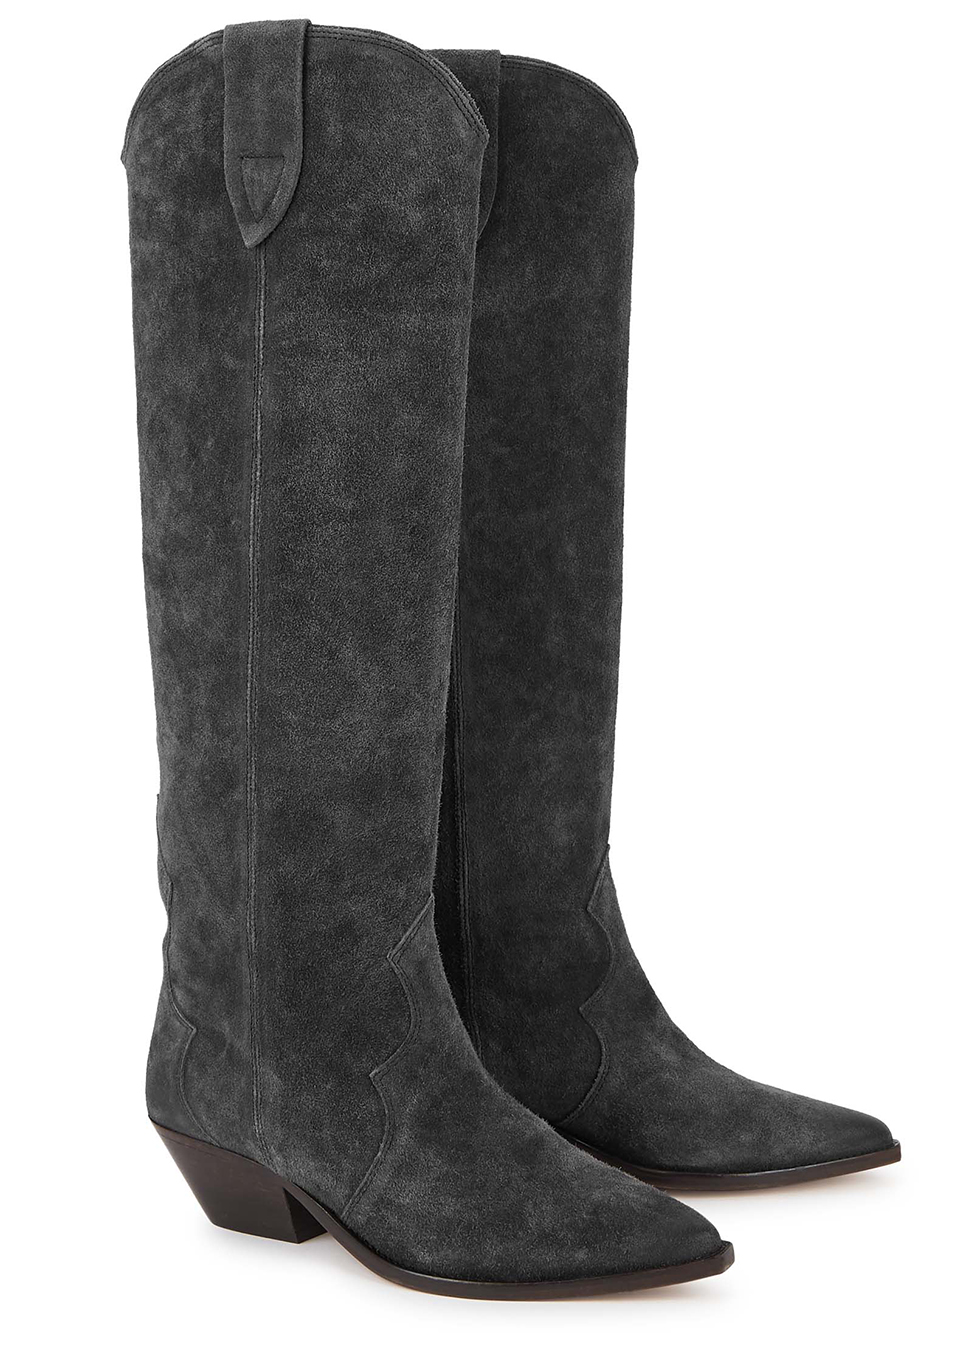 leather and suede knee high boots